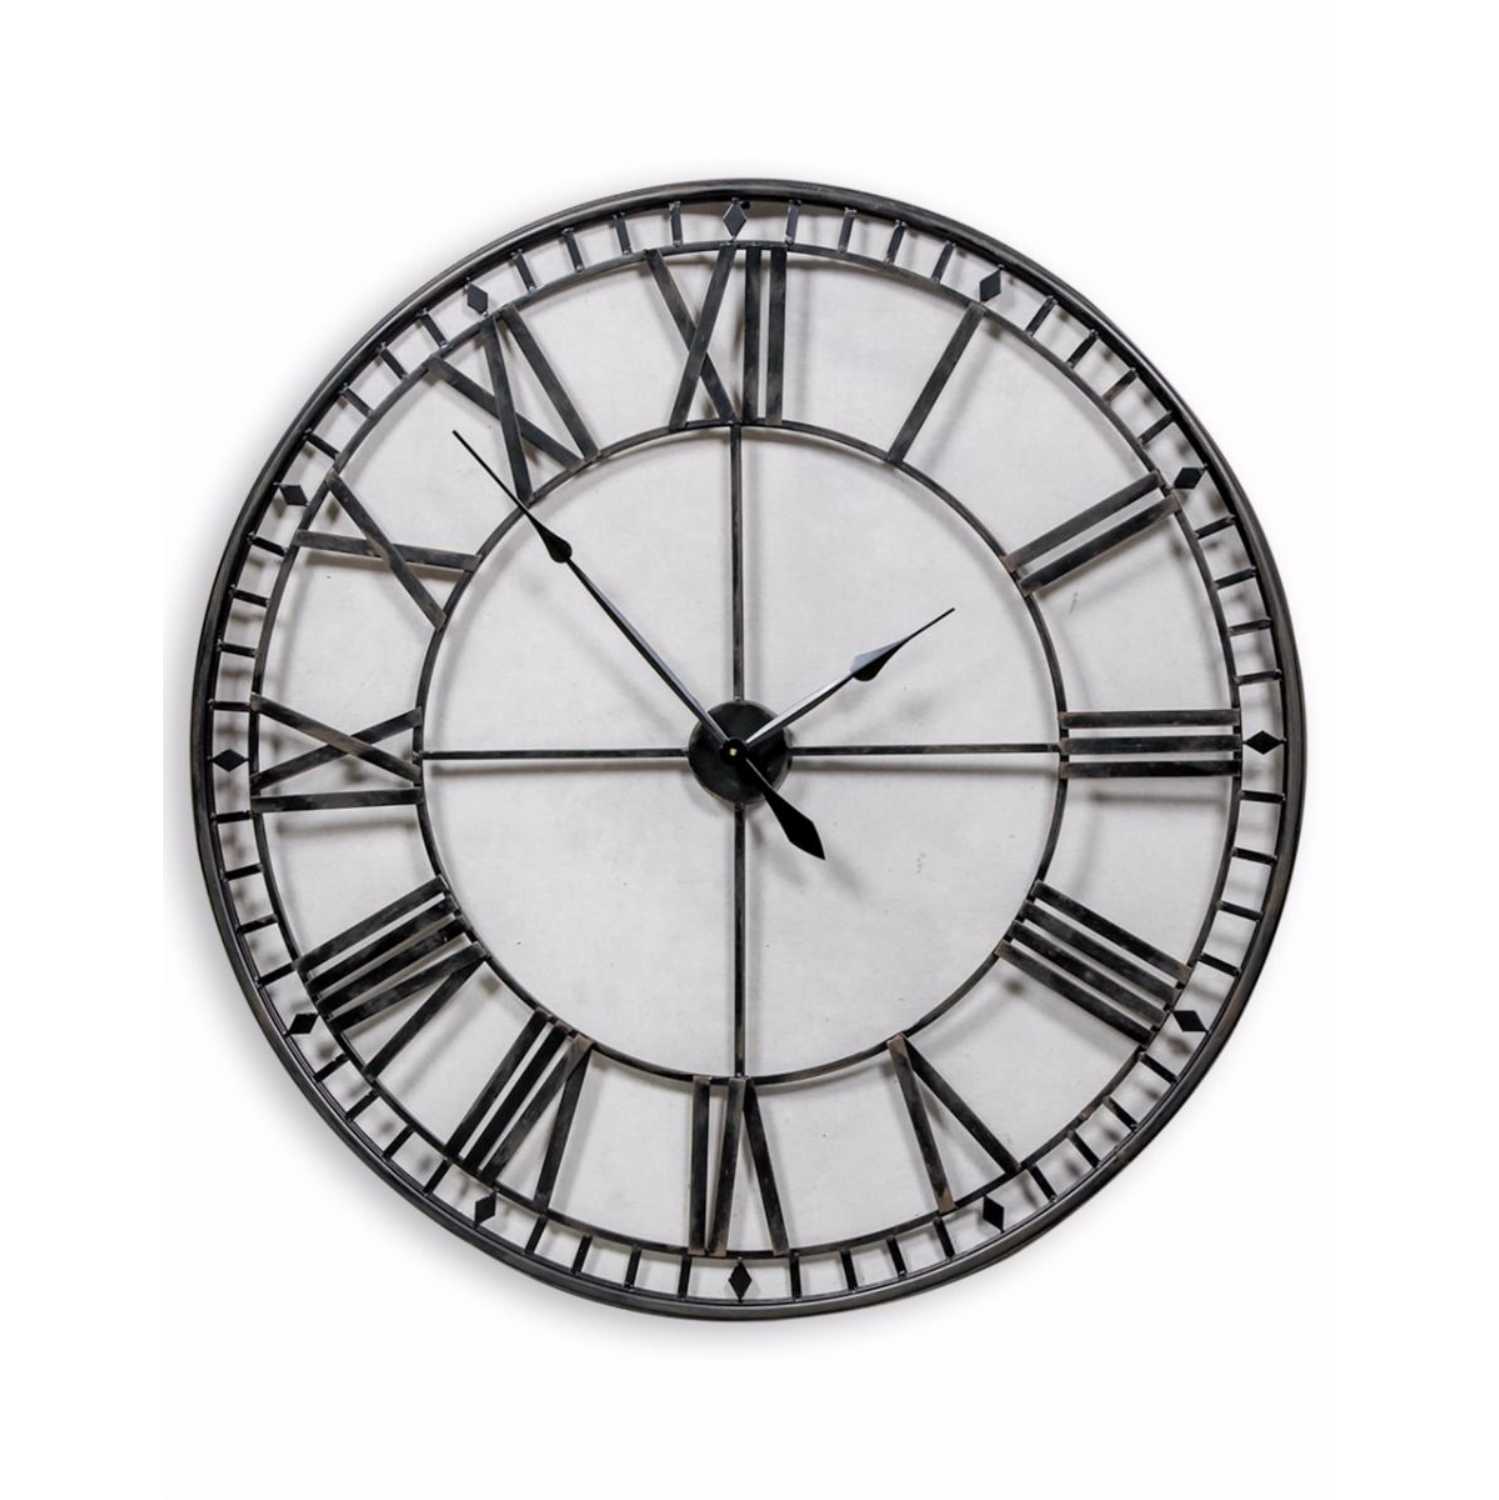 London Large Round Black Painted Skeleton Wall Clock Roman Numerals